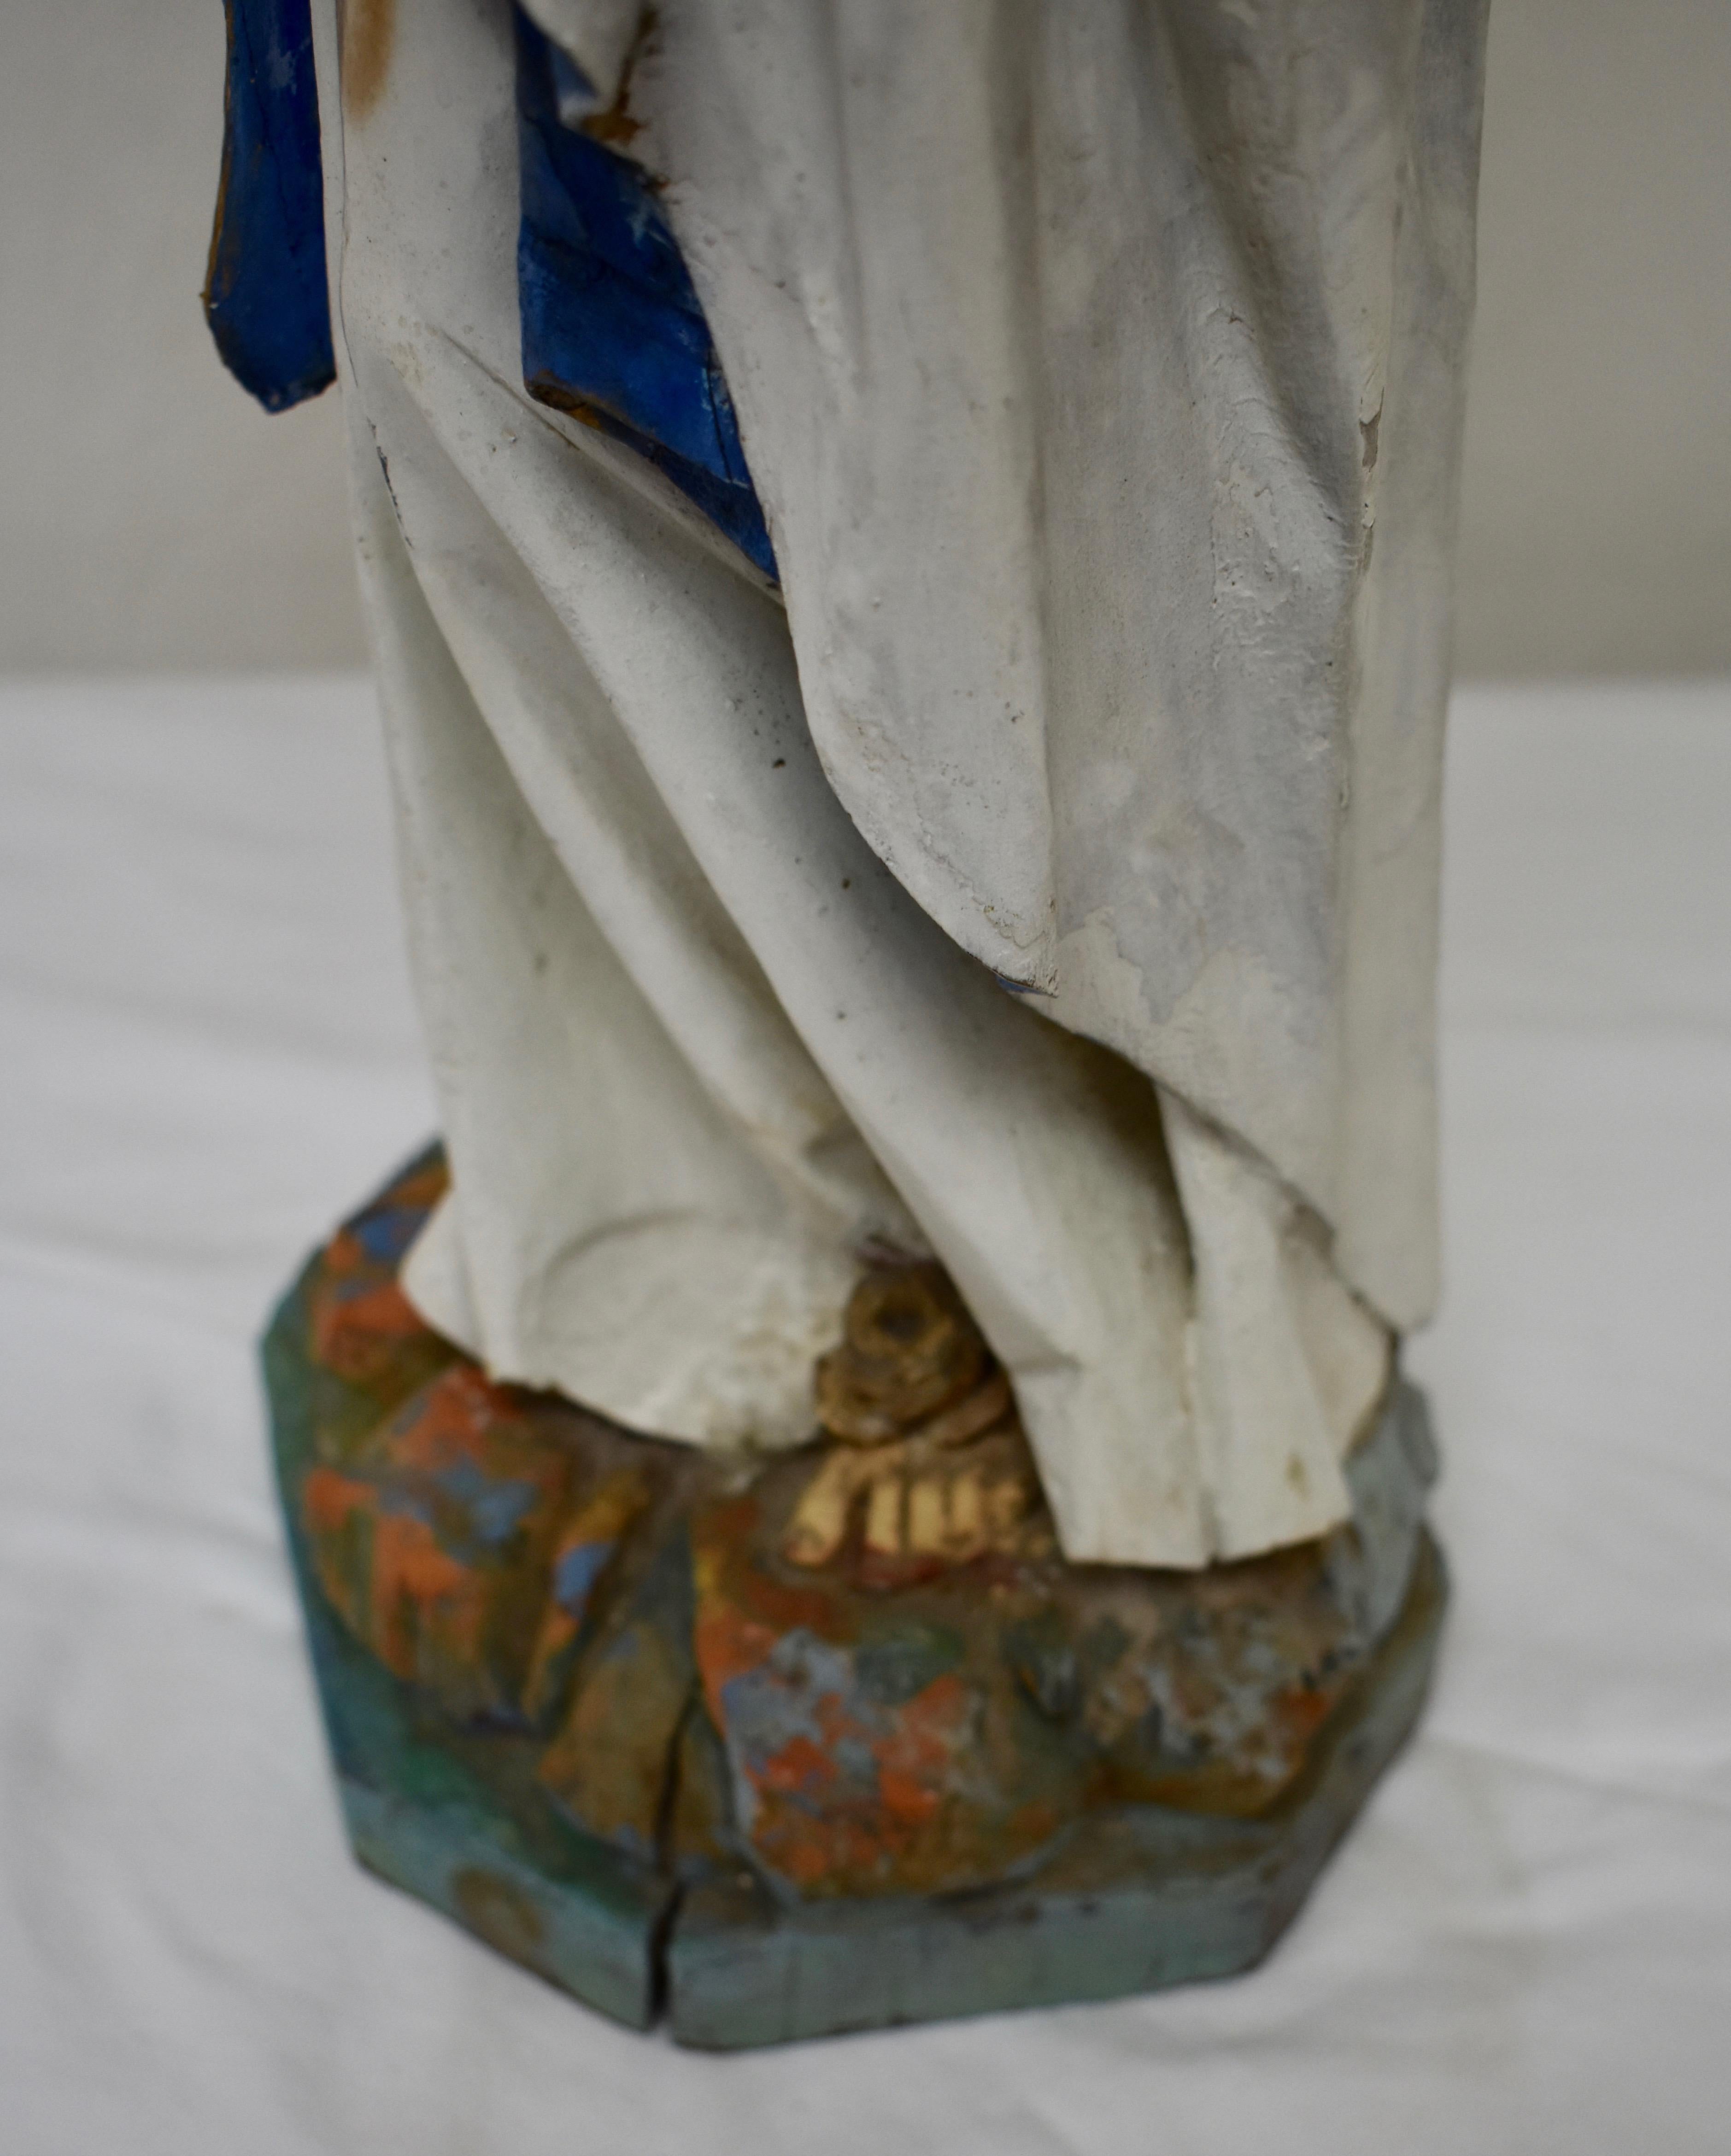 Hand Carved Wooden Sculpture of Our Lady of Lourdes 1